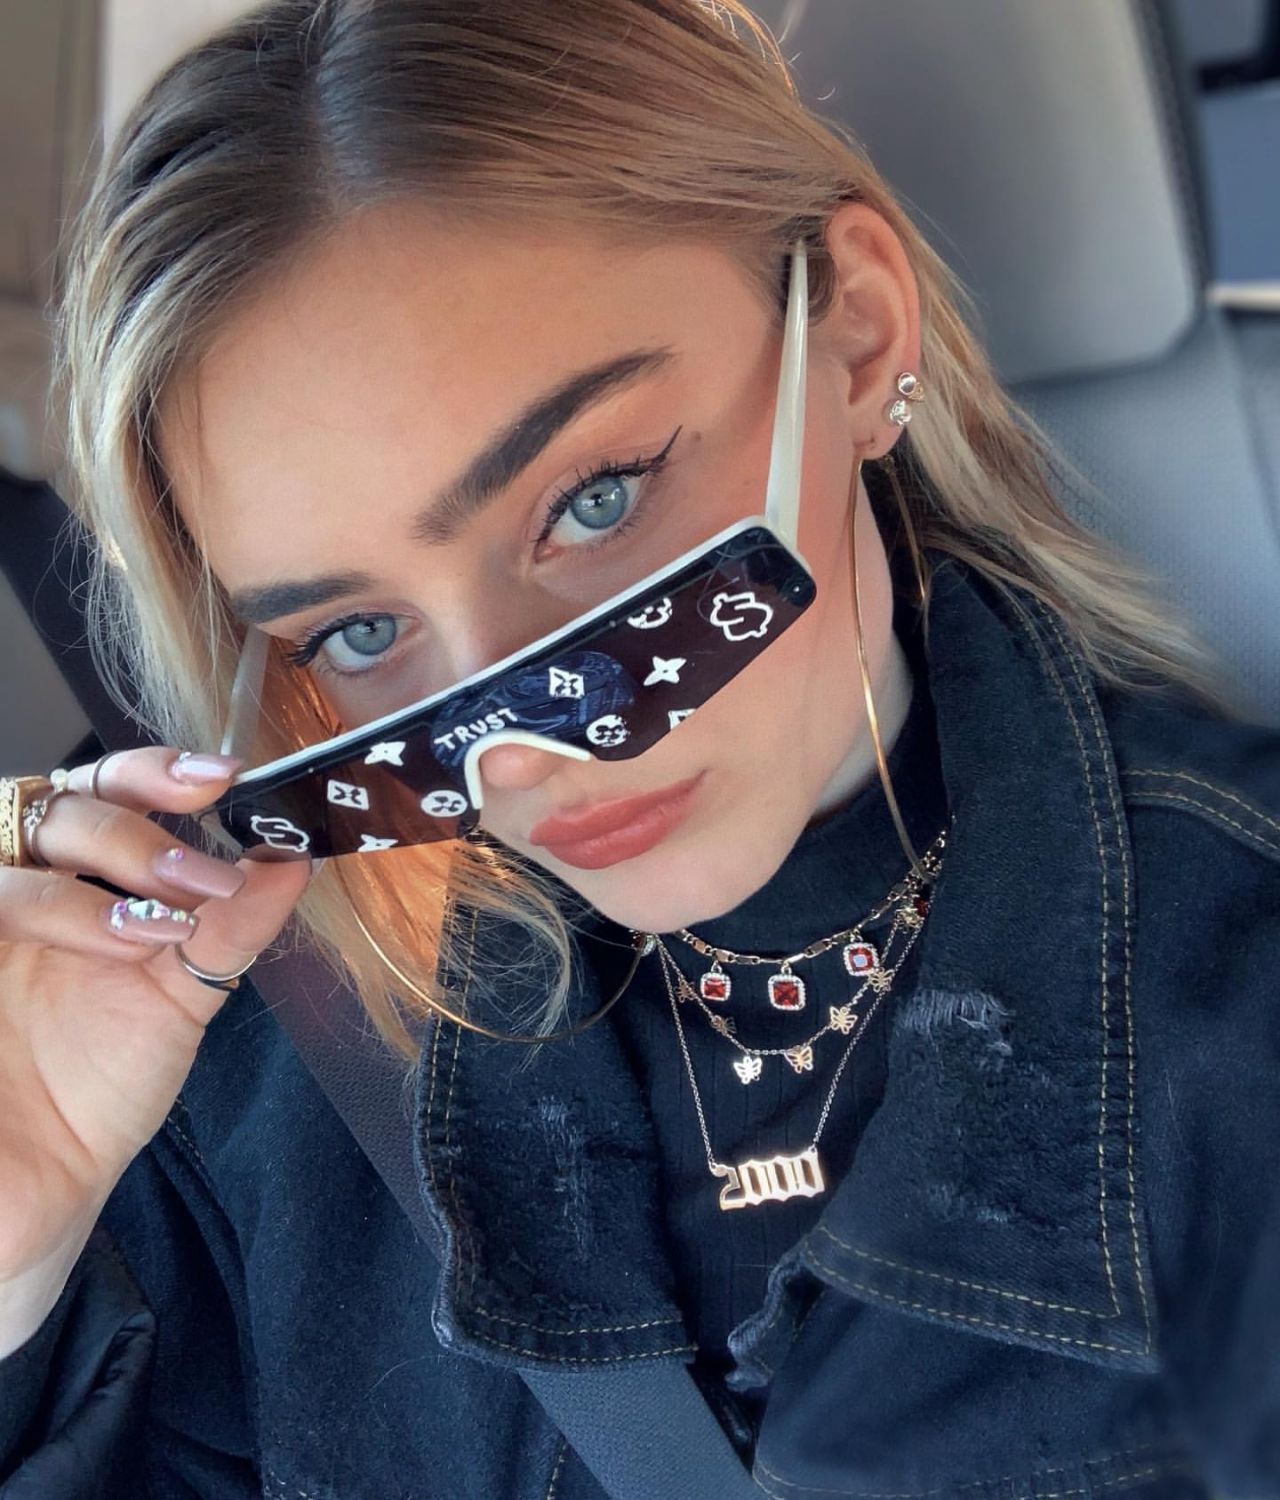 Meg Donnelly 2019 Wallpapers